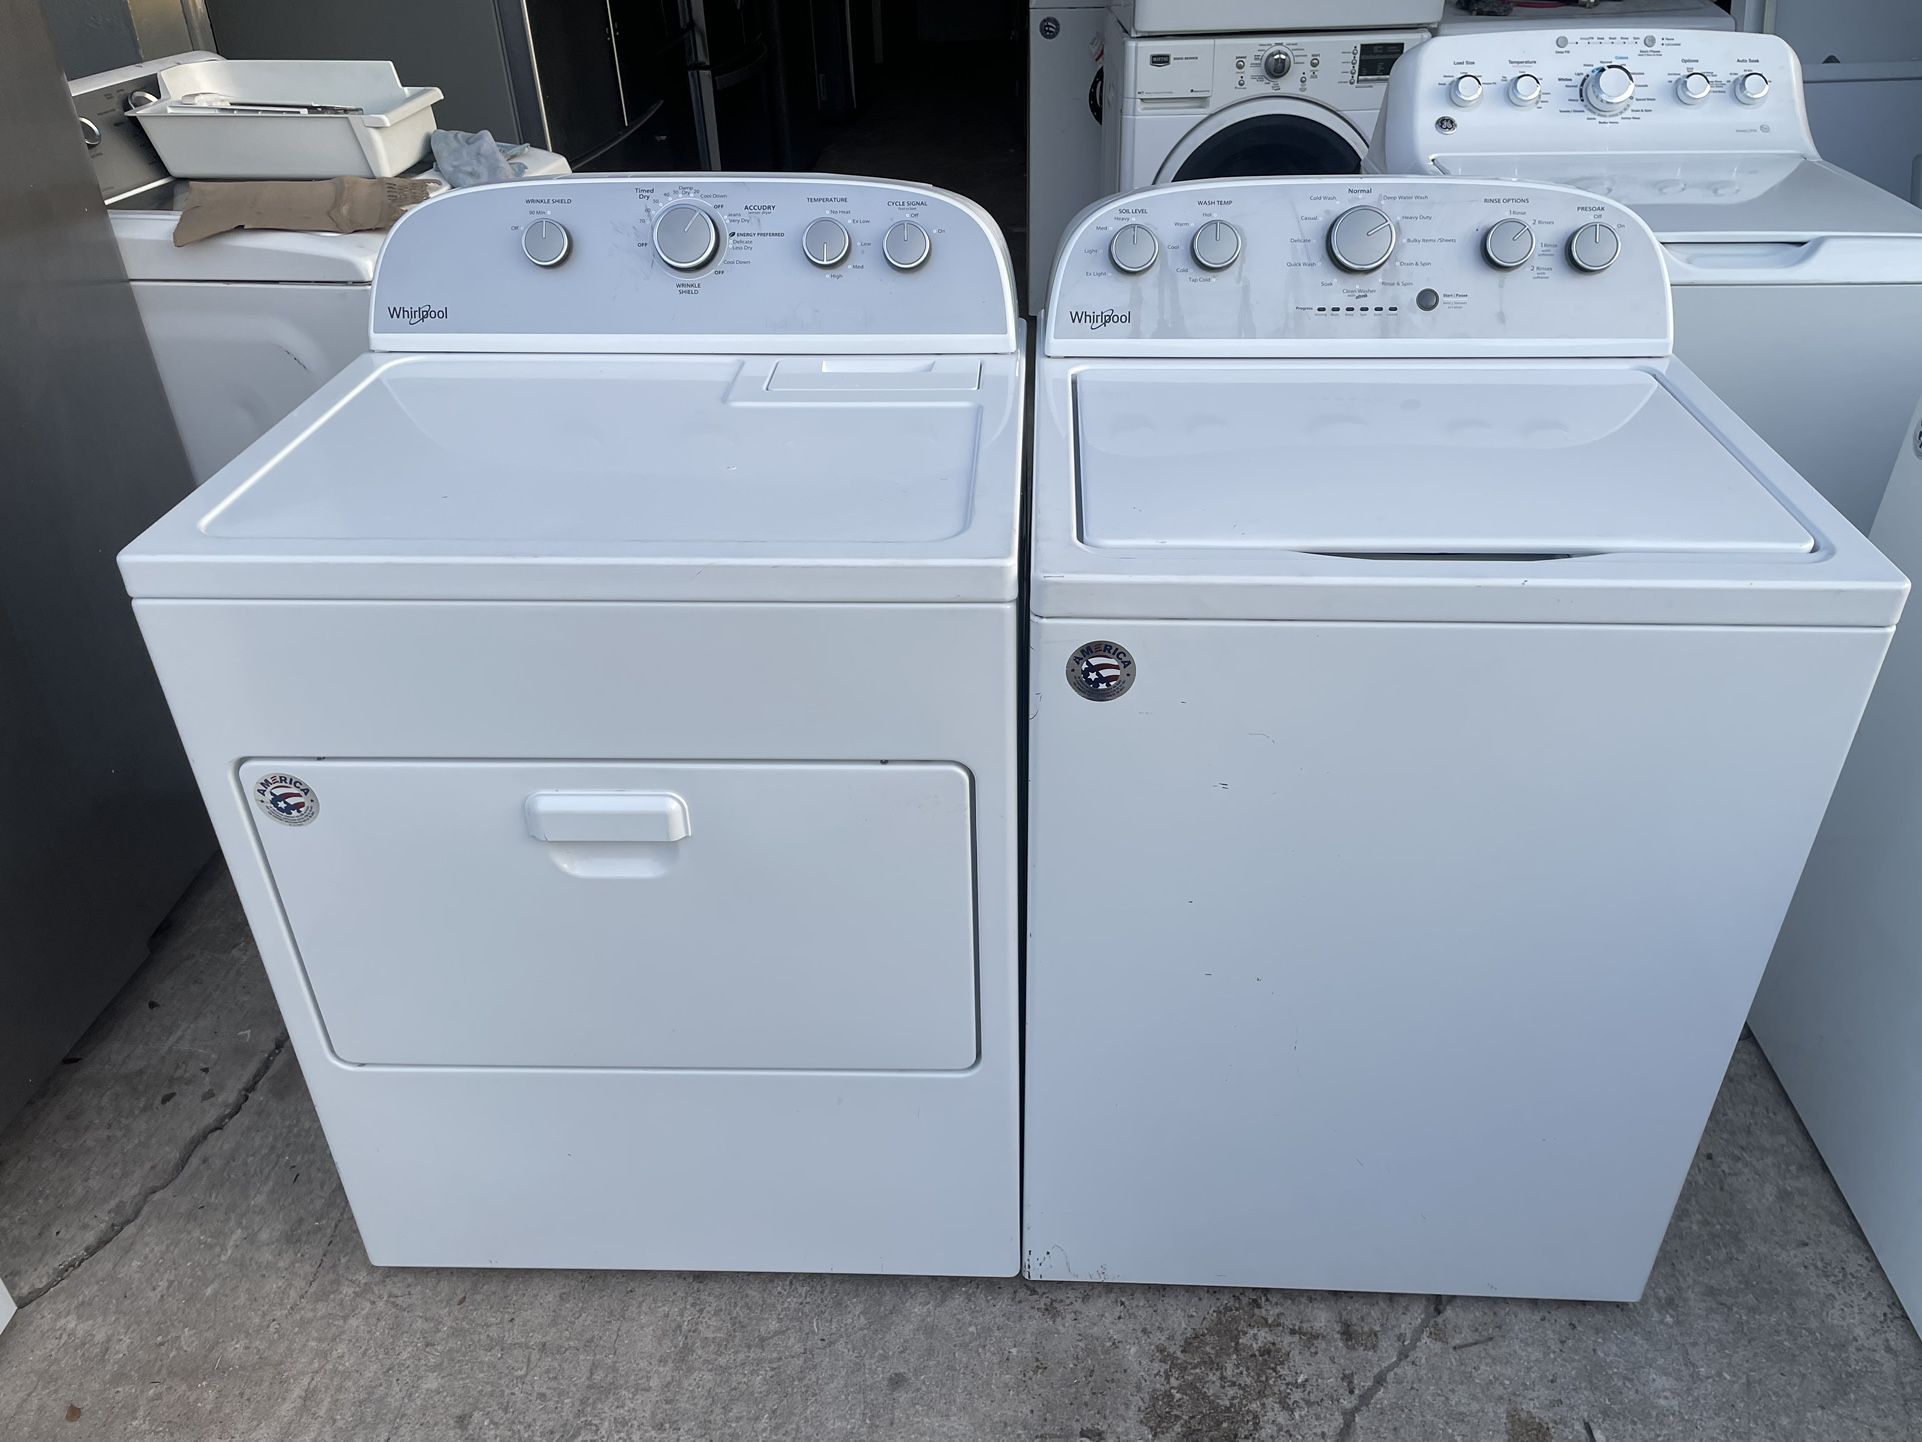 Whirlpool Washer And Dryer Everything Works Good